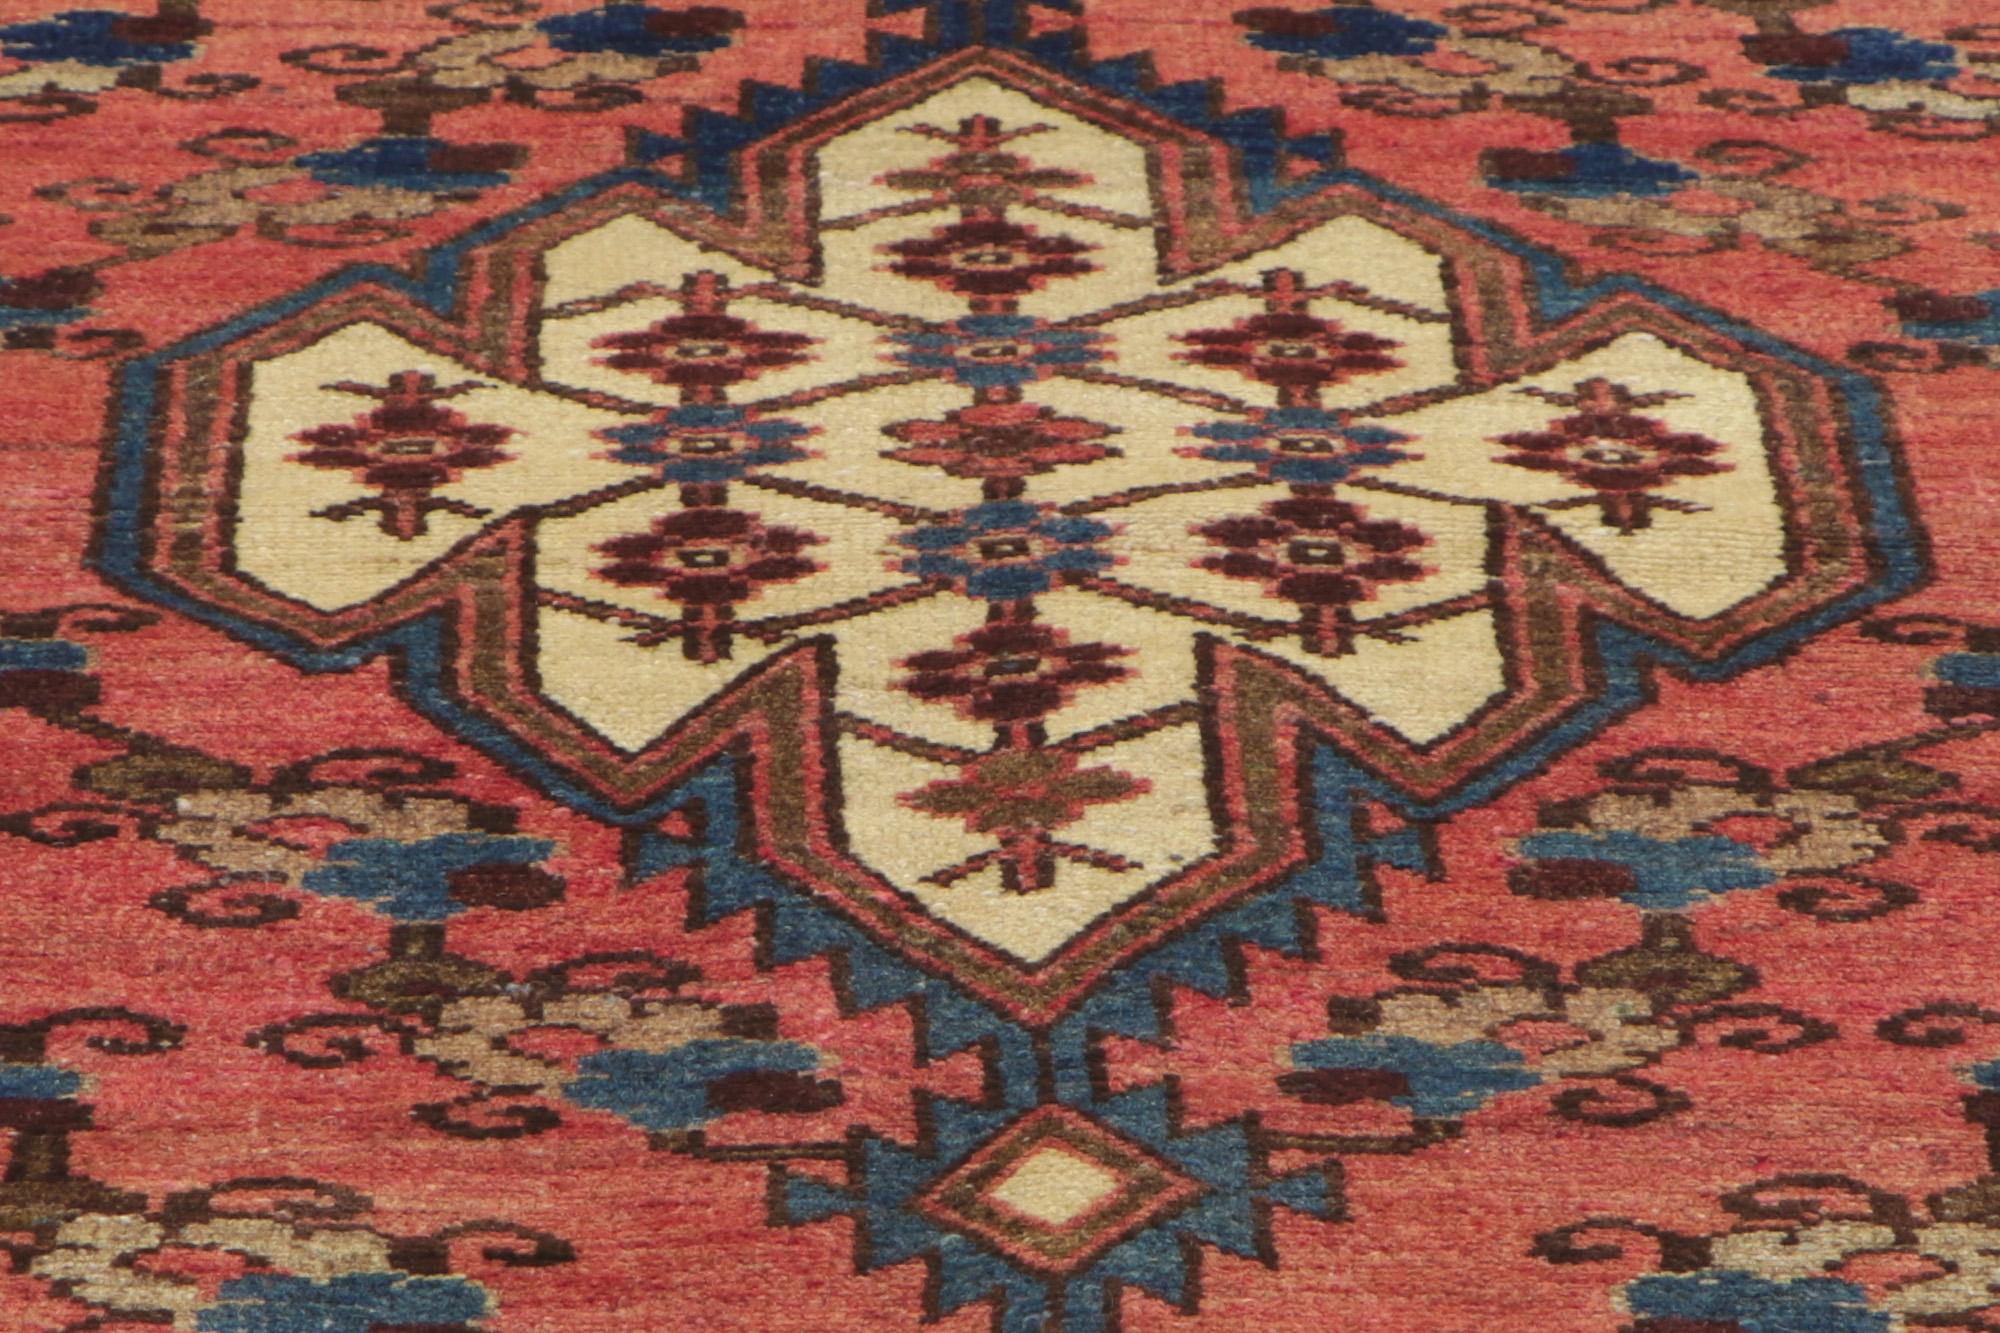 Antique Persian Hamadan Rug, Midcentury Modern Meets Tribal Enchantment In Good Condition For Sale In Dallas, TX